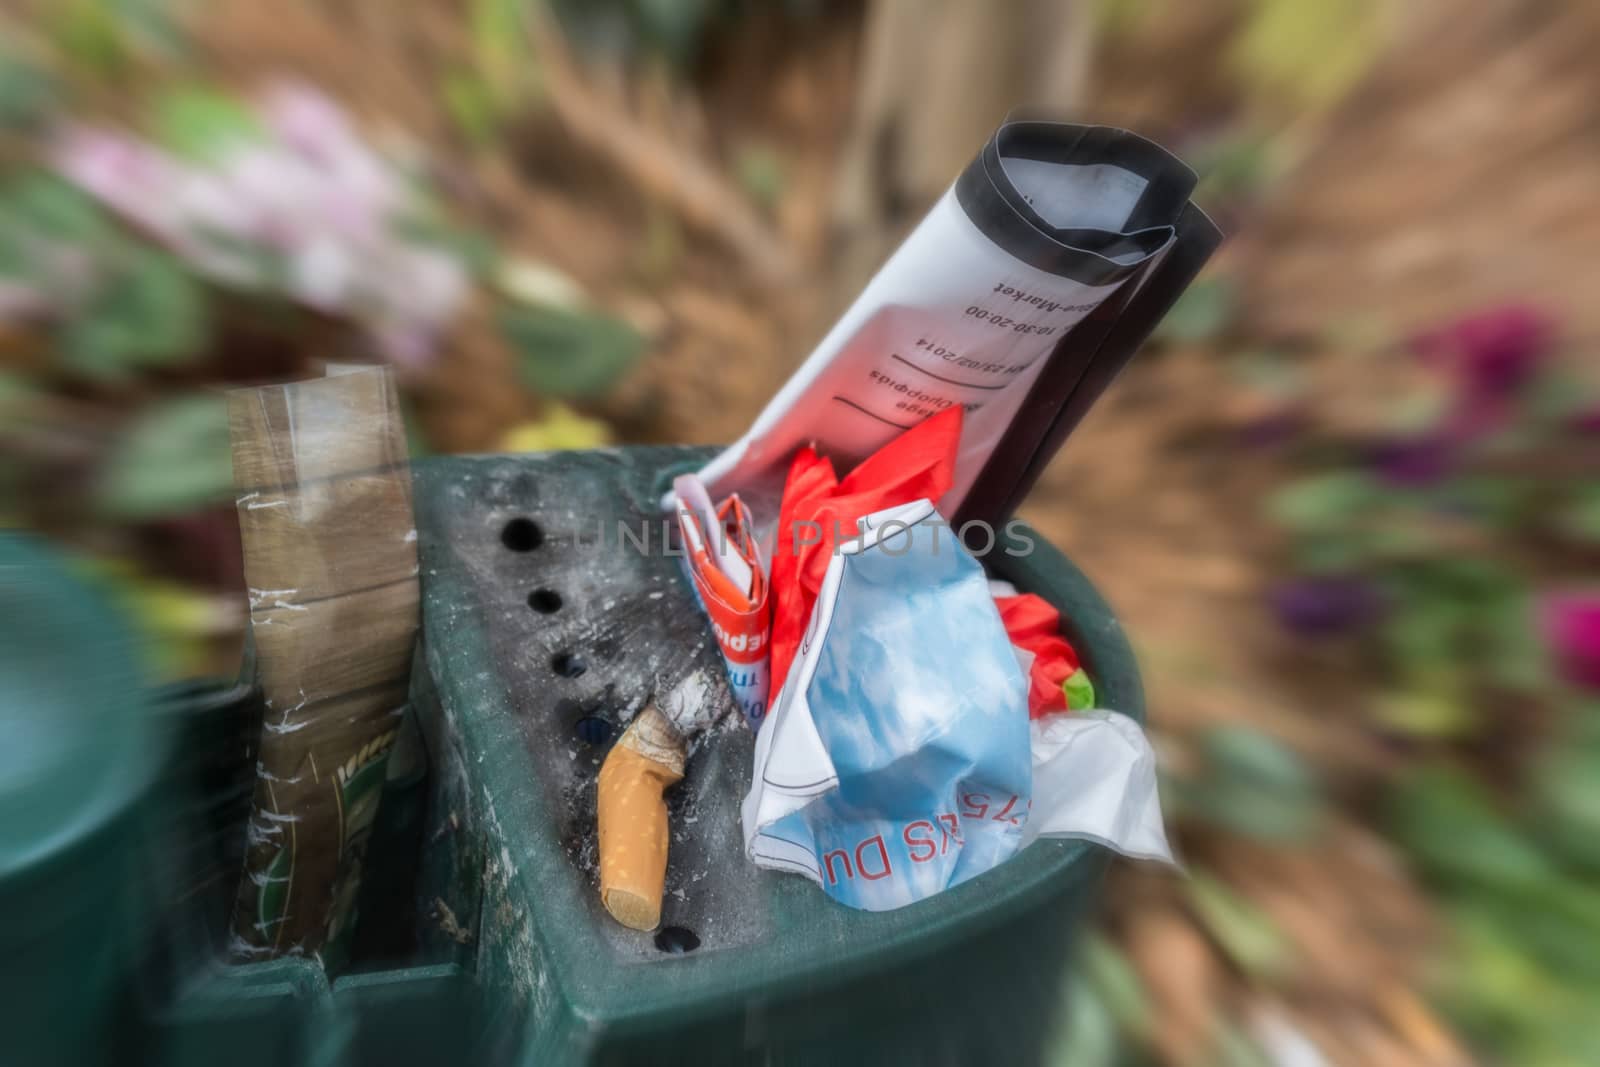 Waste in a street litter by tomypety